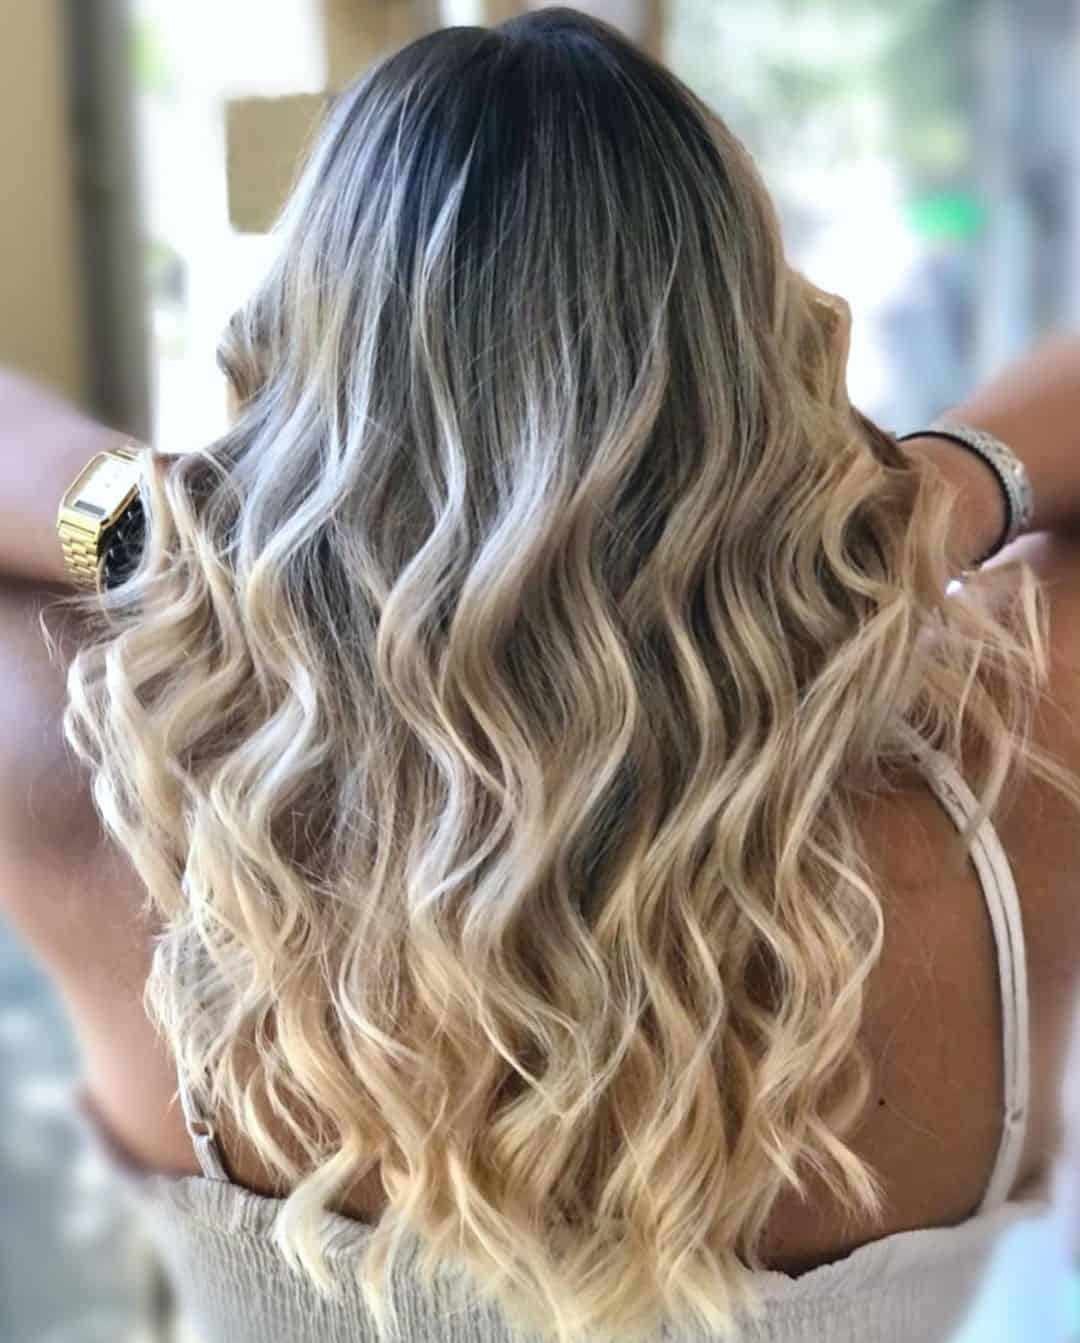 Ombre Hair Colors For Wavy Blonde Hair 